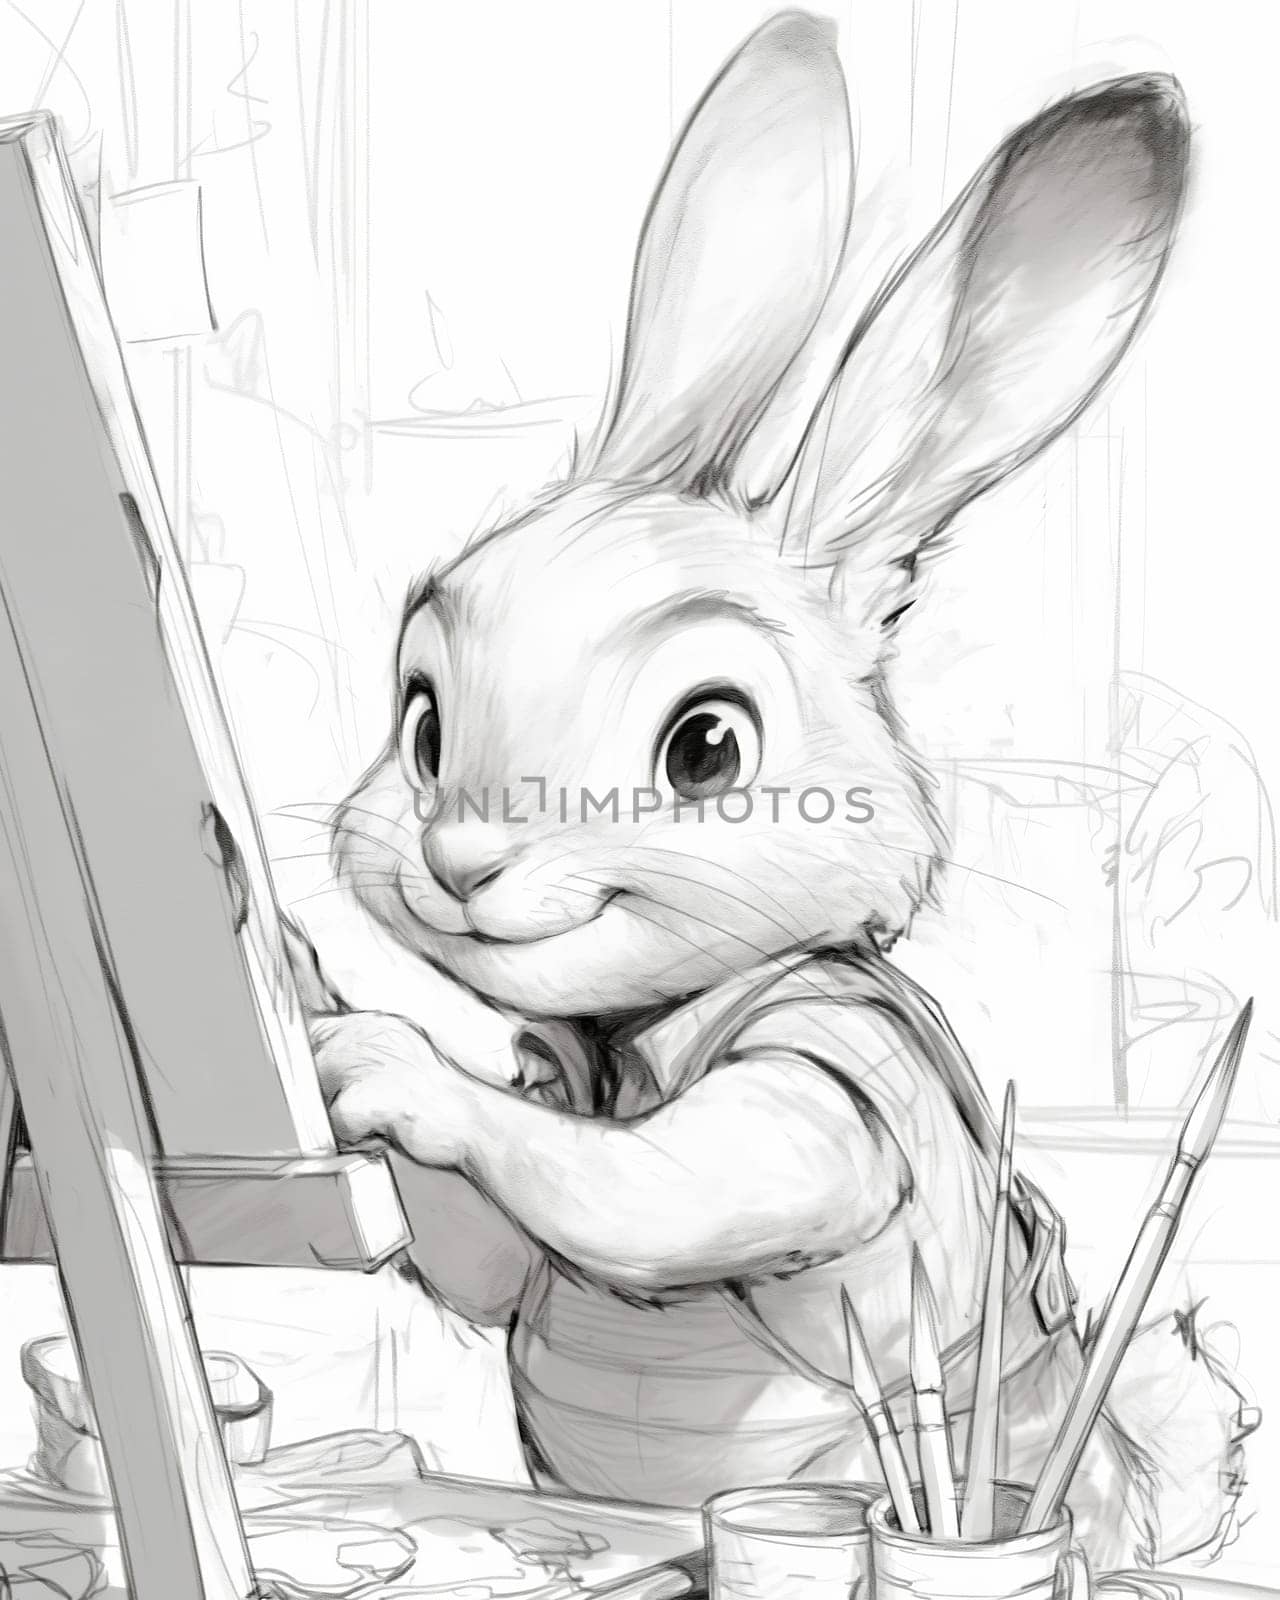 Coloring book for children, coloring animal, hare. by Fischeron